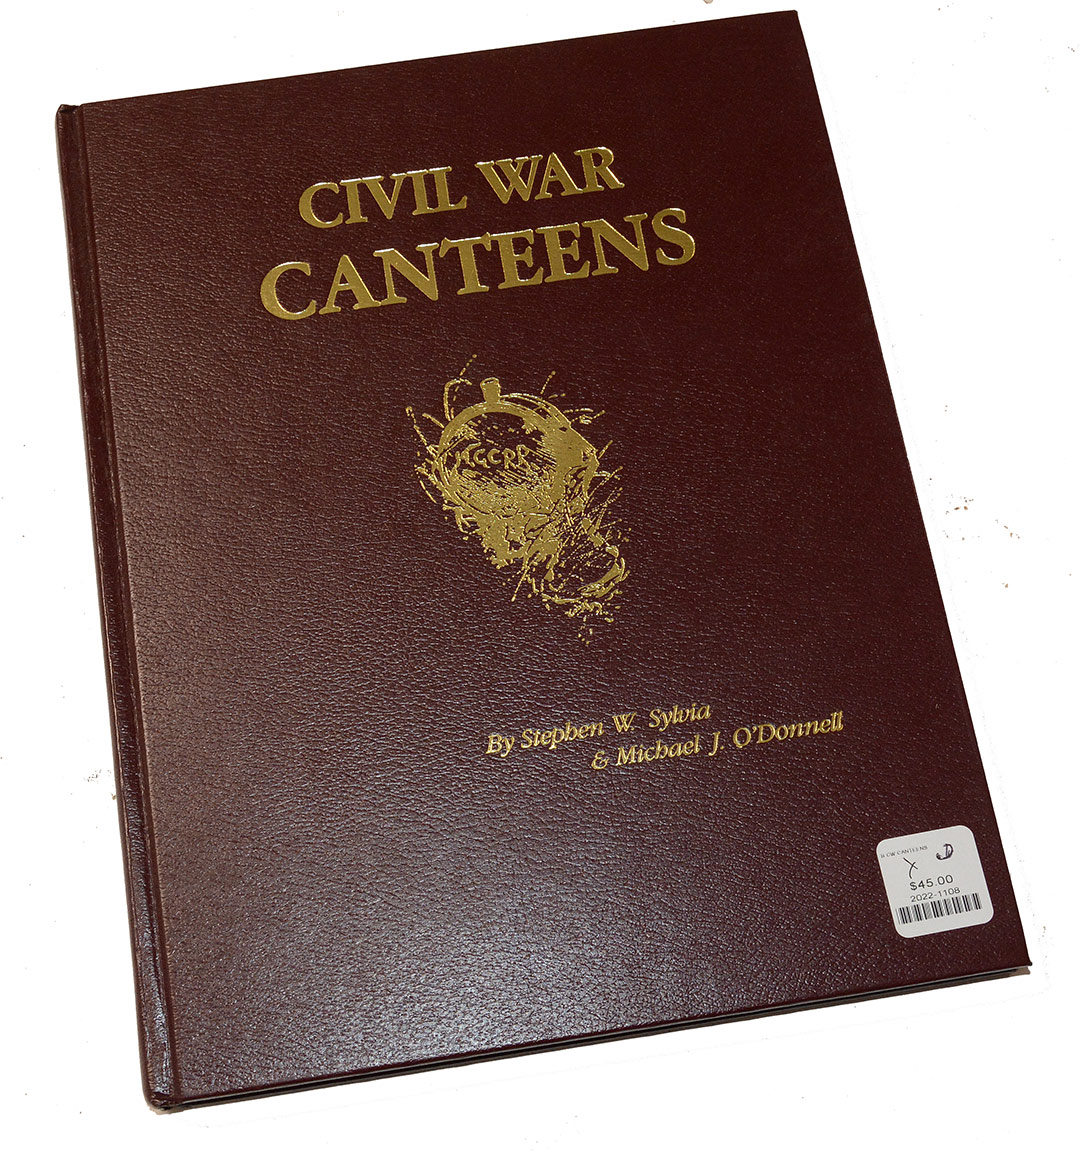 DELUXE LEATHER-BOUND EDITION OF CIVIL WAR CANTEENS BY SYLVIA AND O’DONNELL